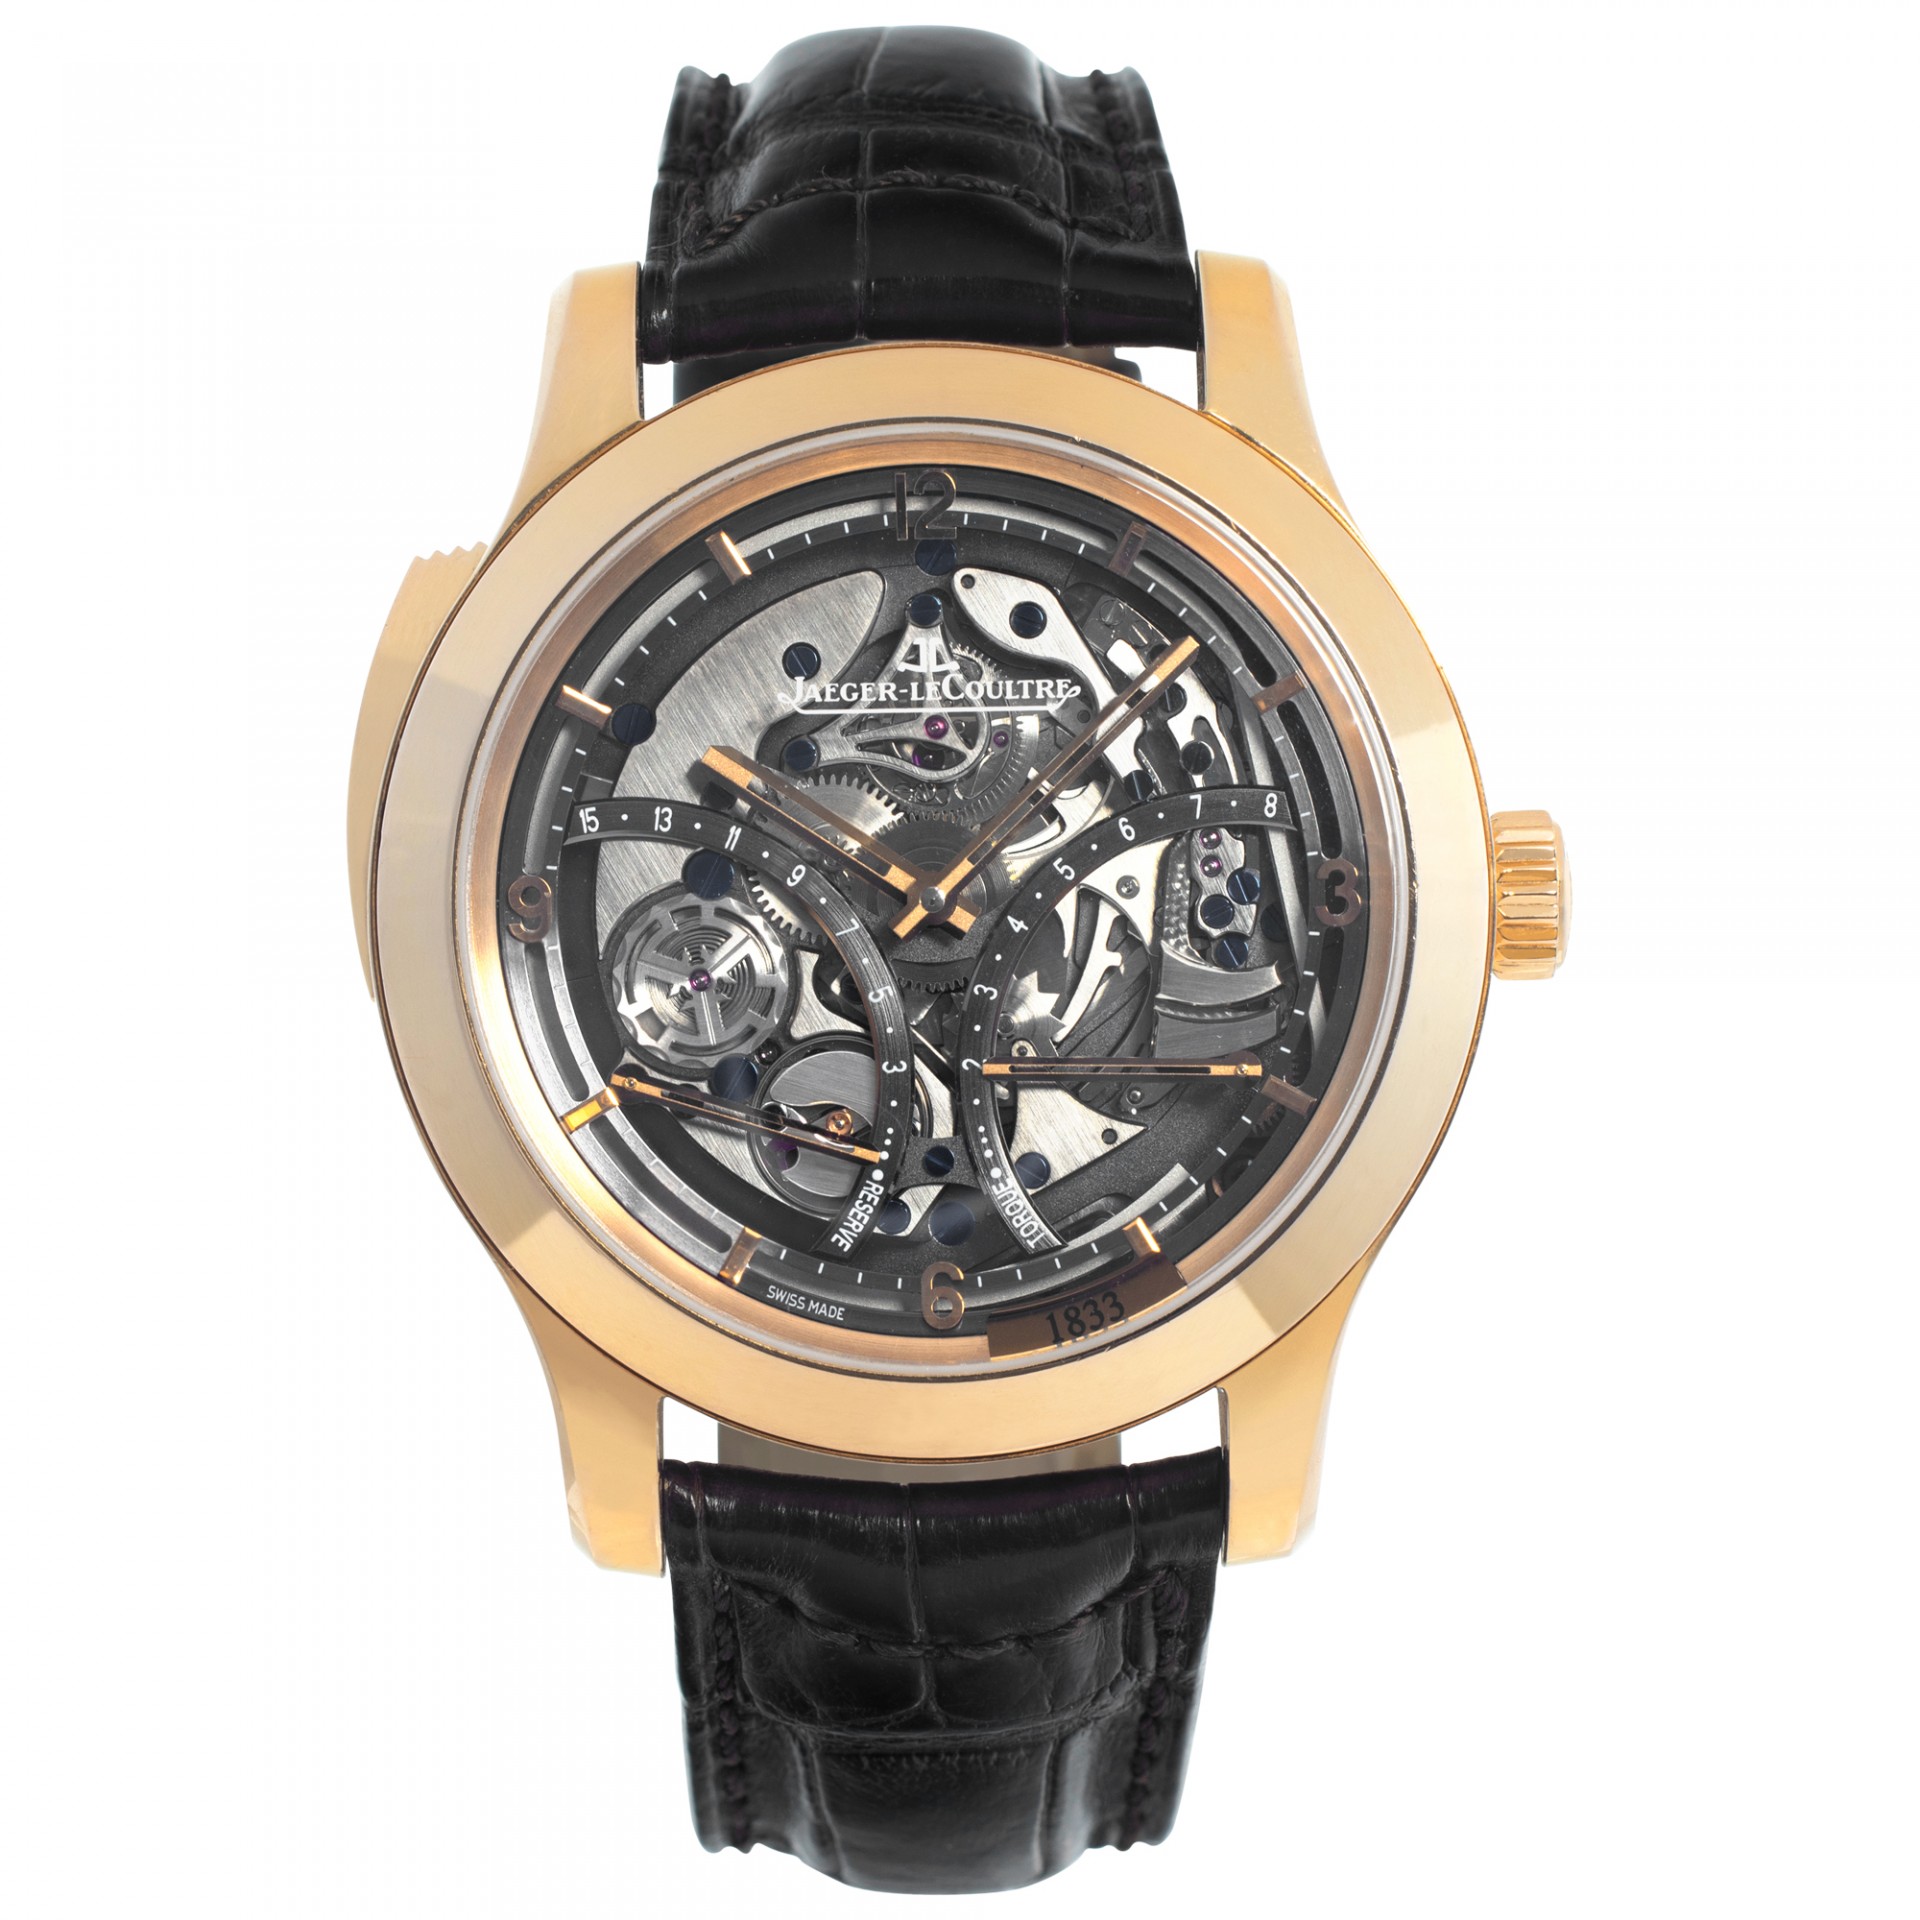 Jaeger-LeCoultre-175th-Anniversary-Master-Minute-Repeater-Q1642450